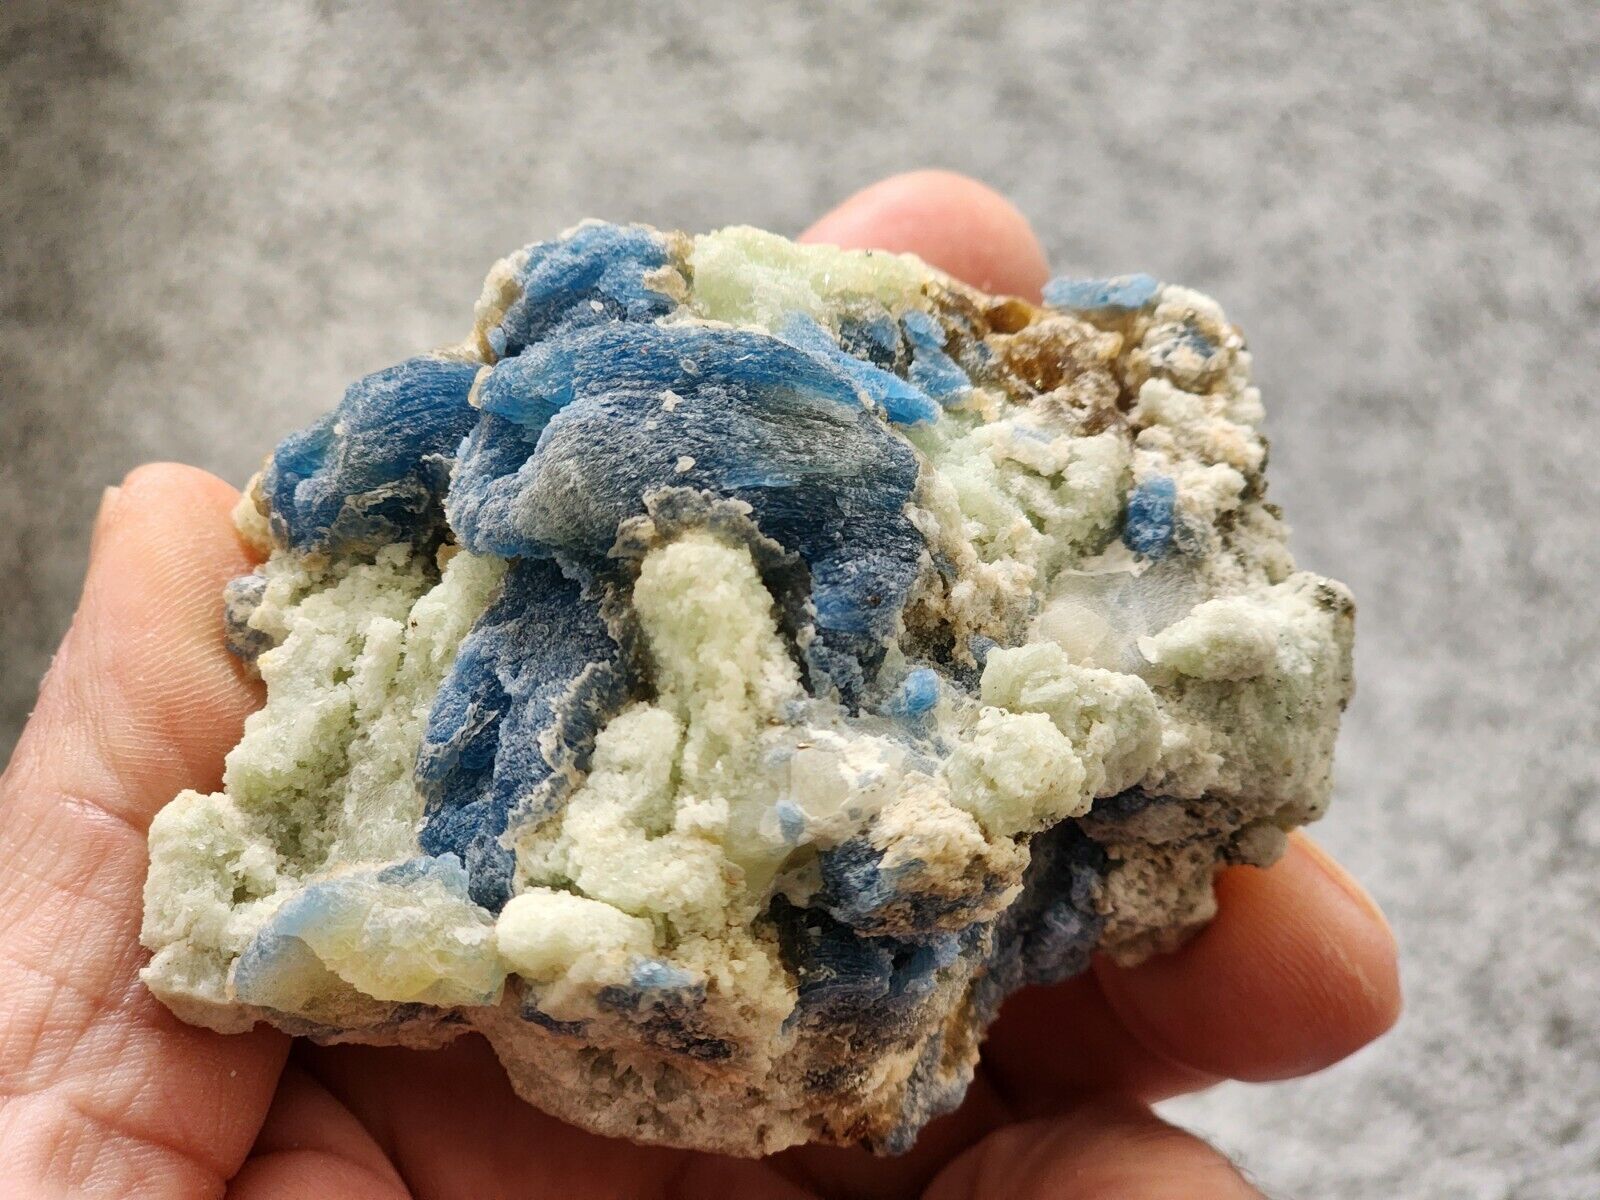 RARE,GORGEOUS BLUE AFGHANITE CRYSTALS,MUSCOVITE, AFGHANISTAN 